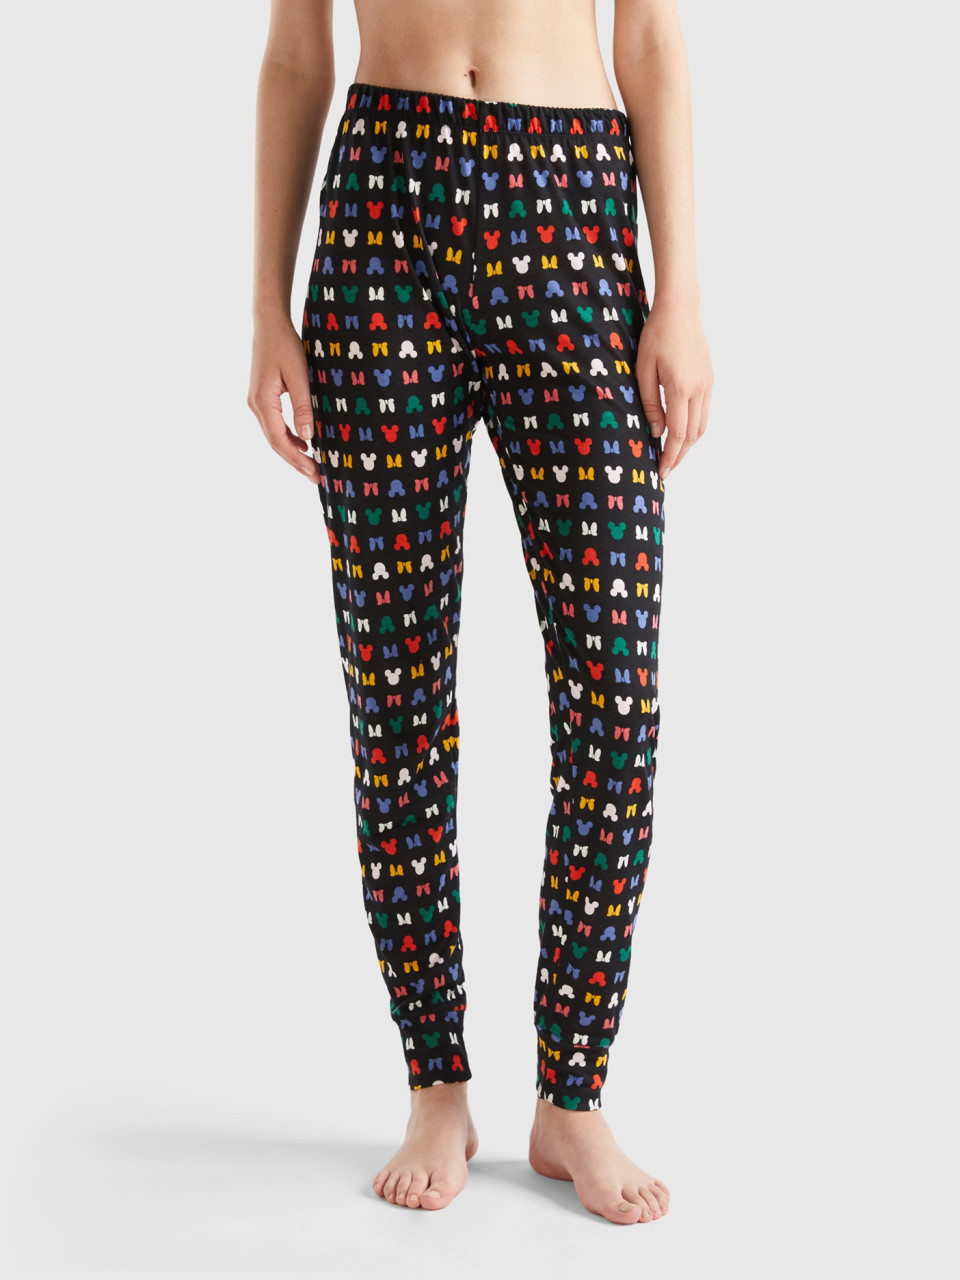 Benetton, Trousers With Disney Print, Multi-color, Women